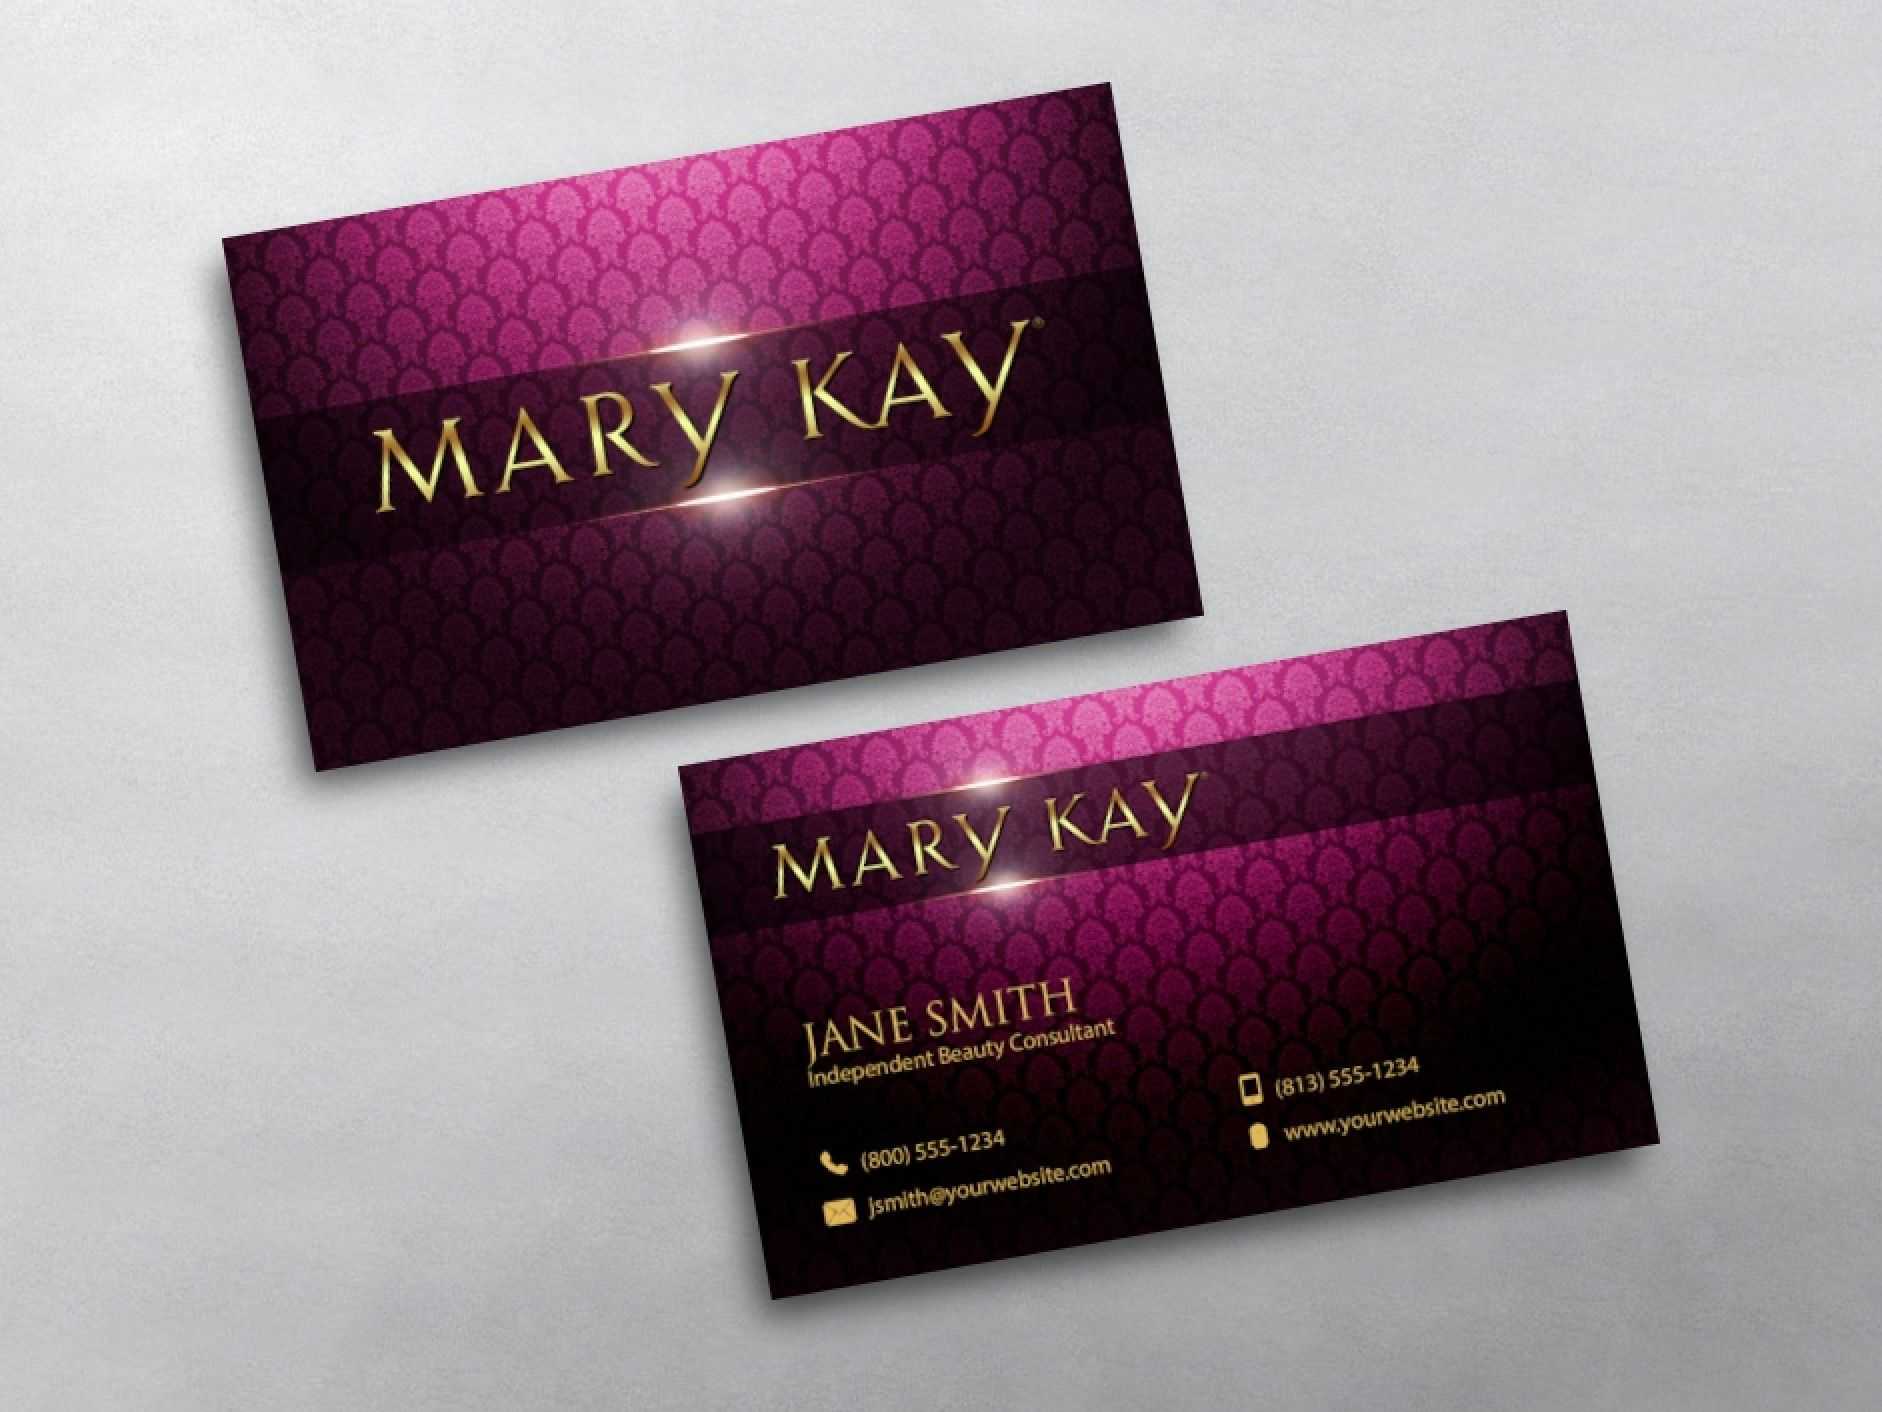 Mary Kay Business Cards In 2019 | Mary Kay, Free Business With Regard To Mary Kay Business Cards Templates Free